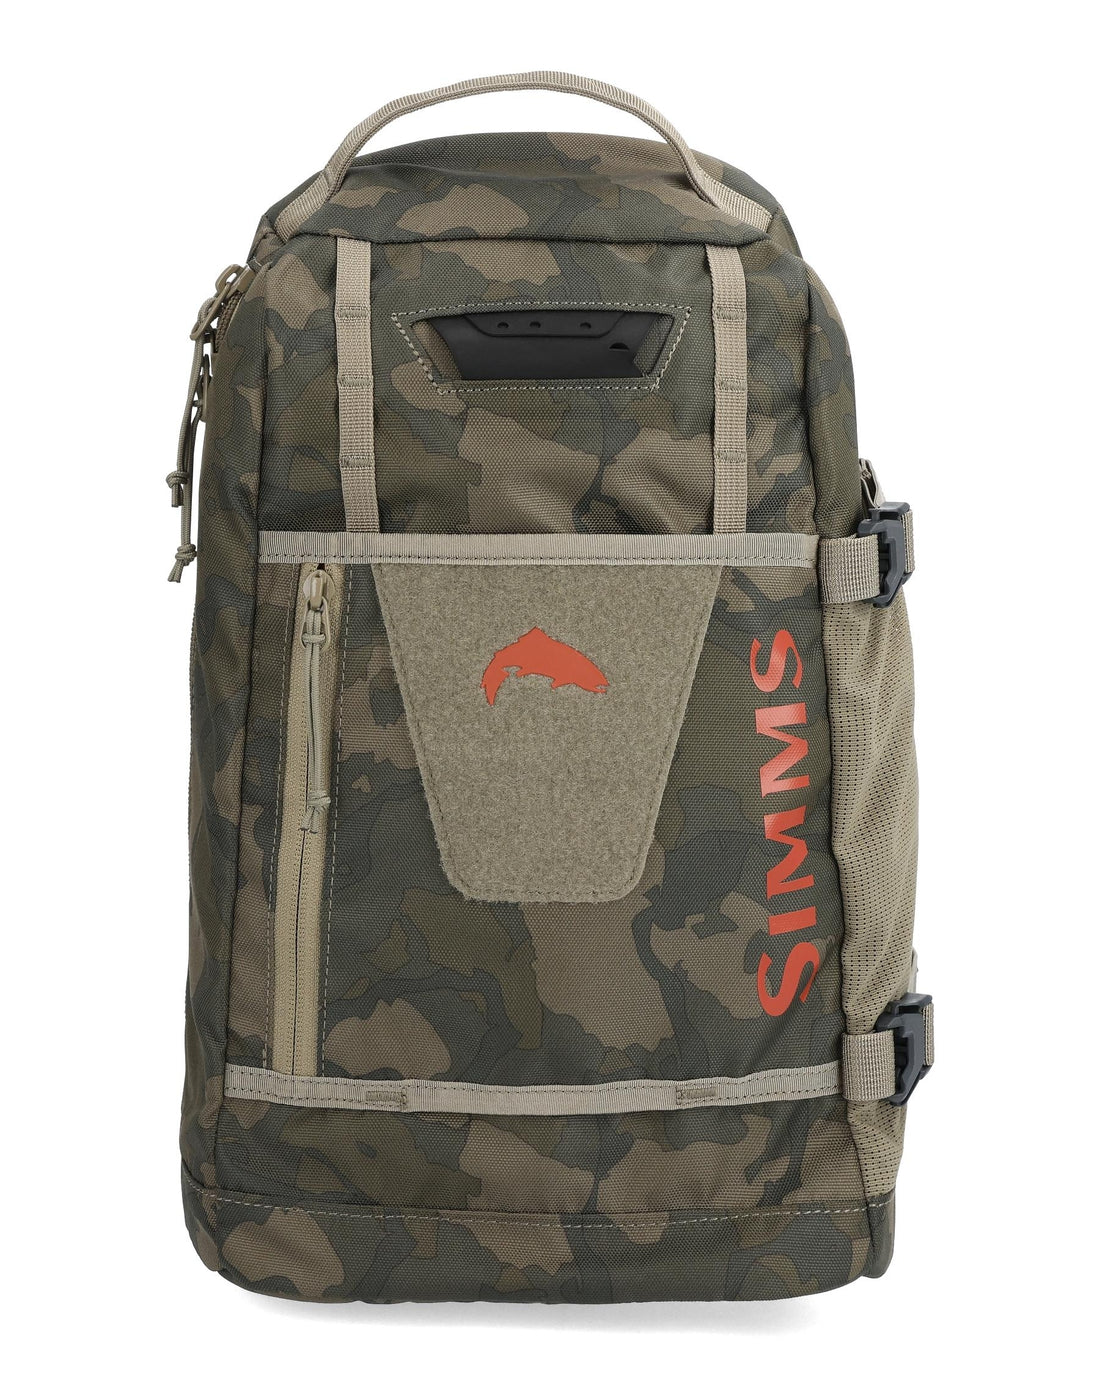 SIMMS TRIBUTARY SLING PACK REGIMENT CAMO OLIVE DRAB